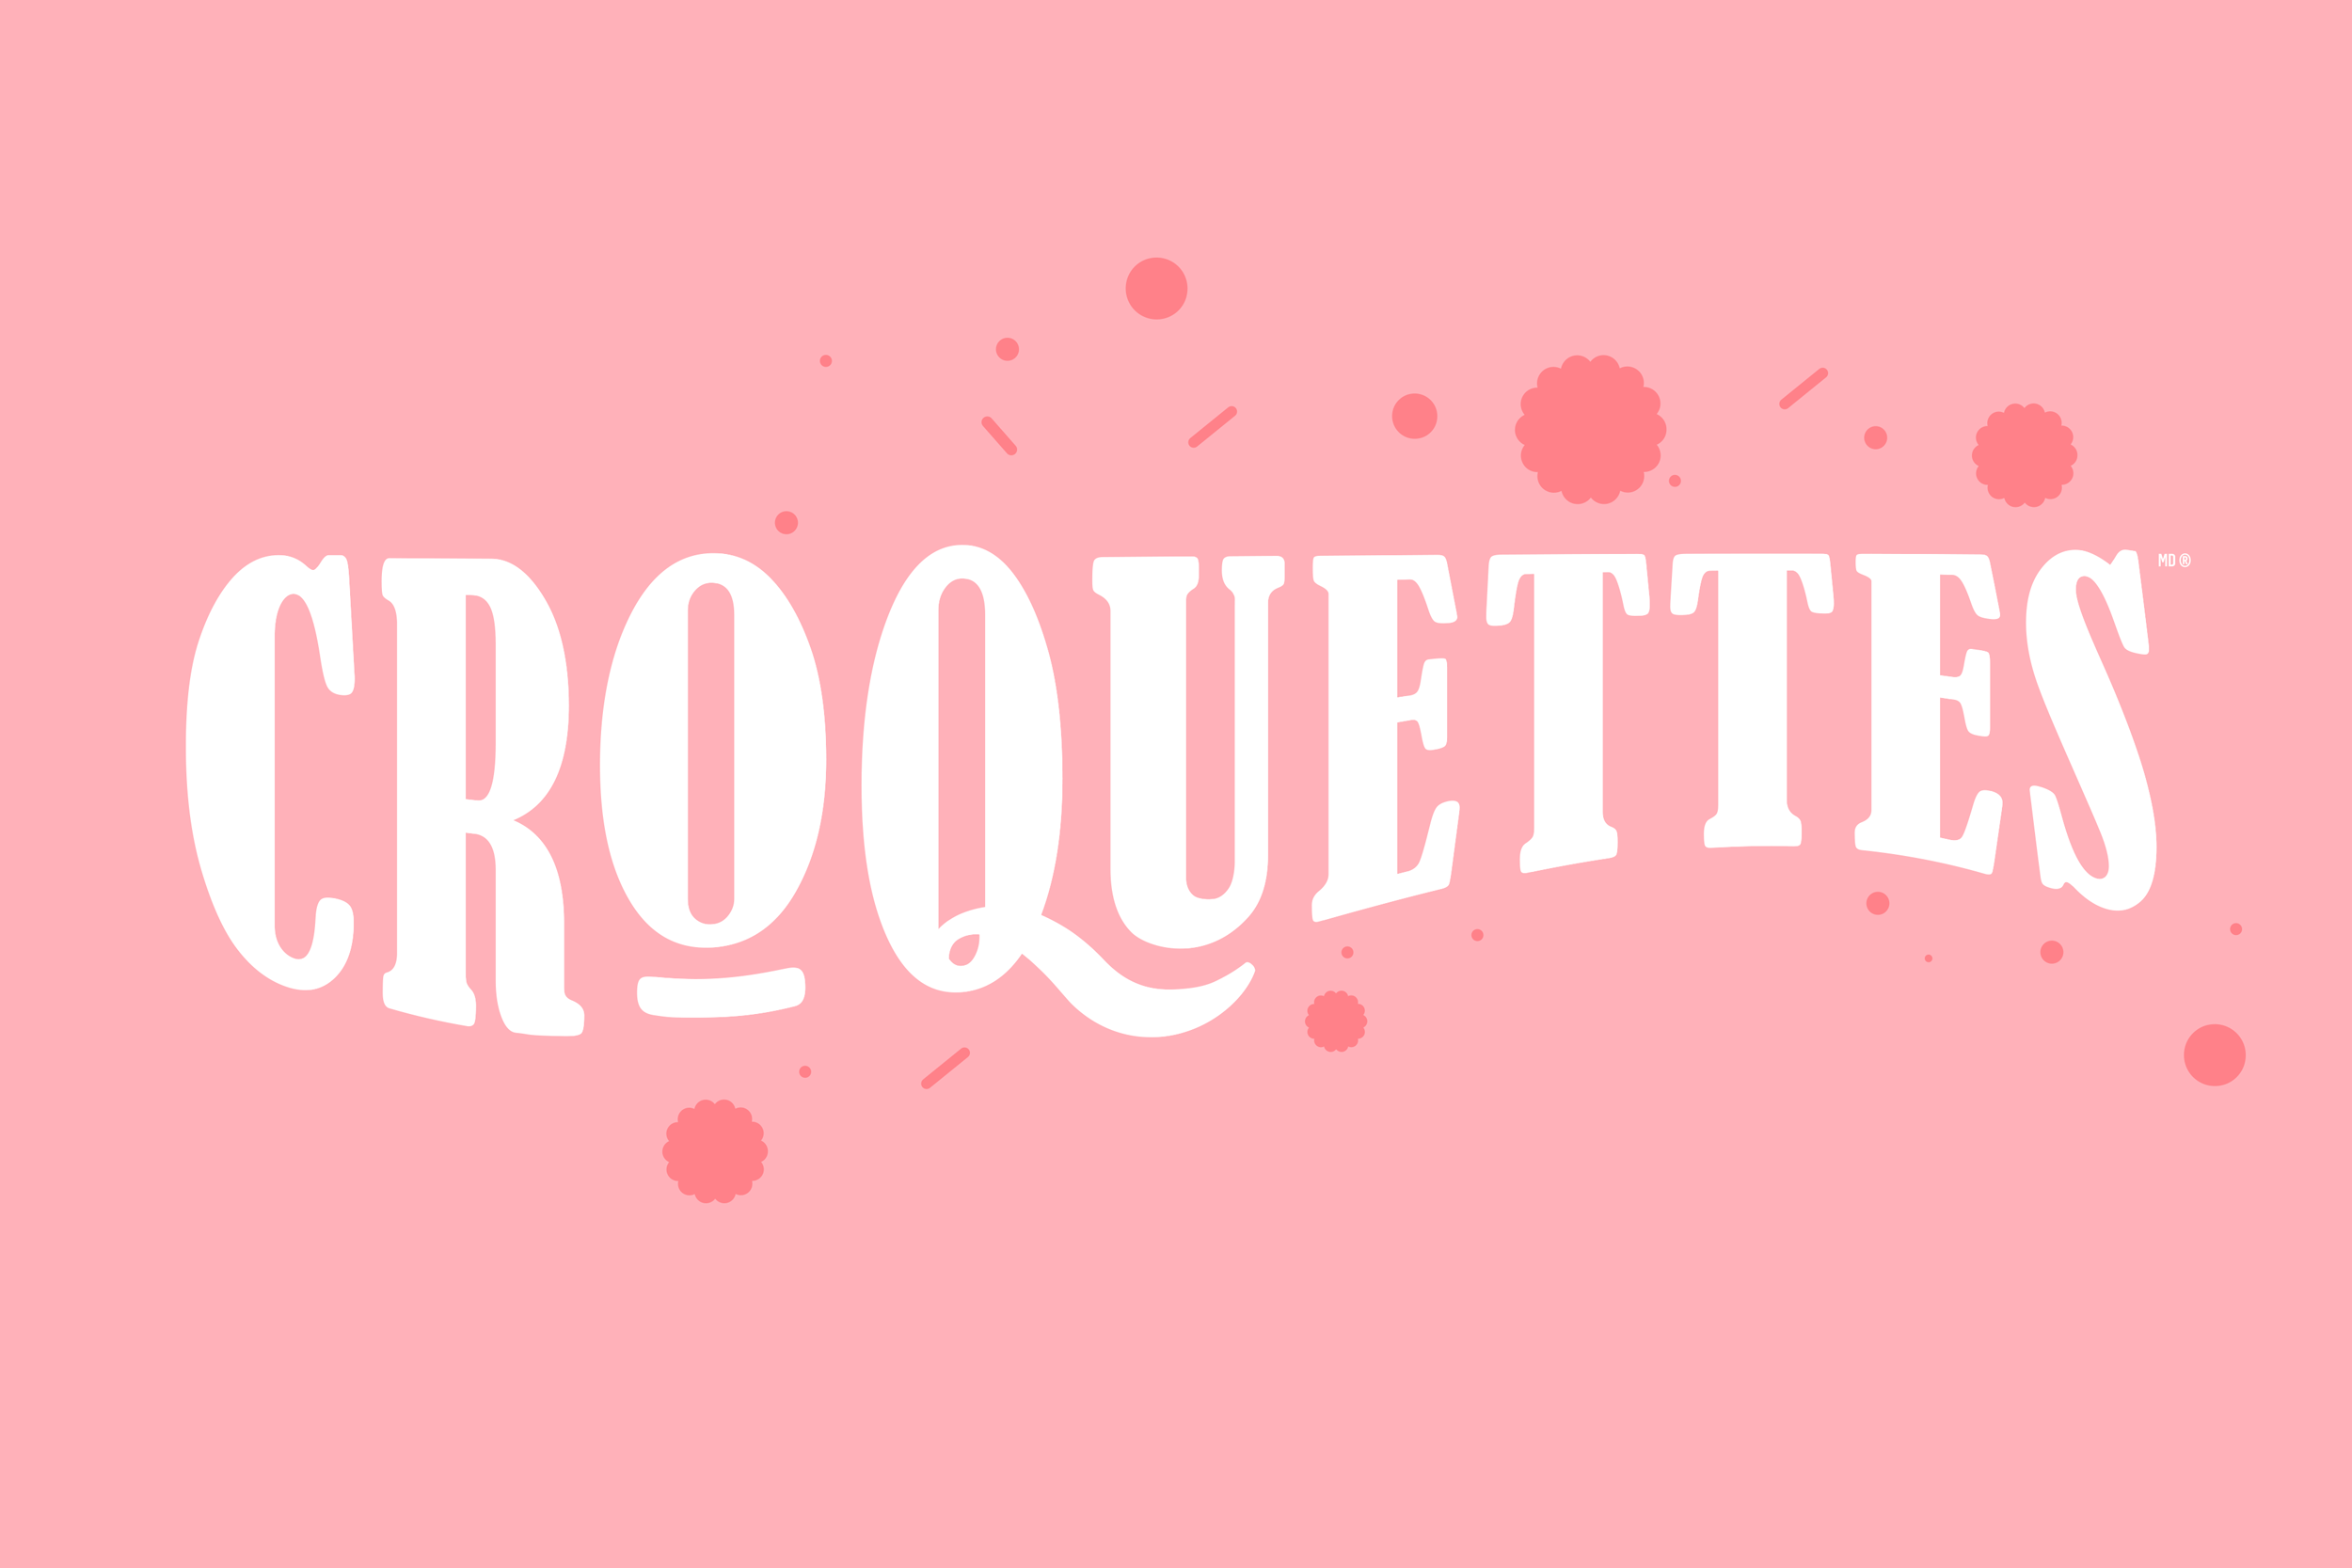 lafamille-vachon-speciality-croquettes-lettering.png